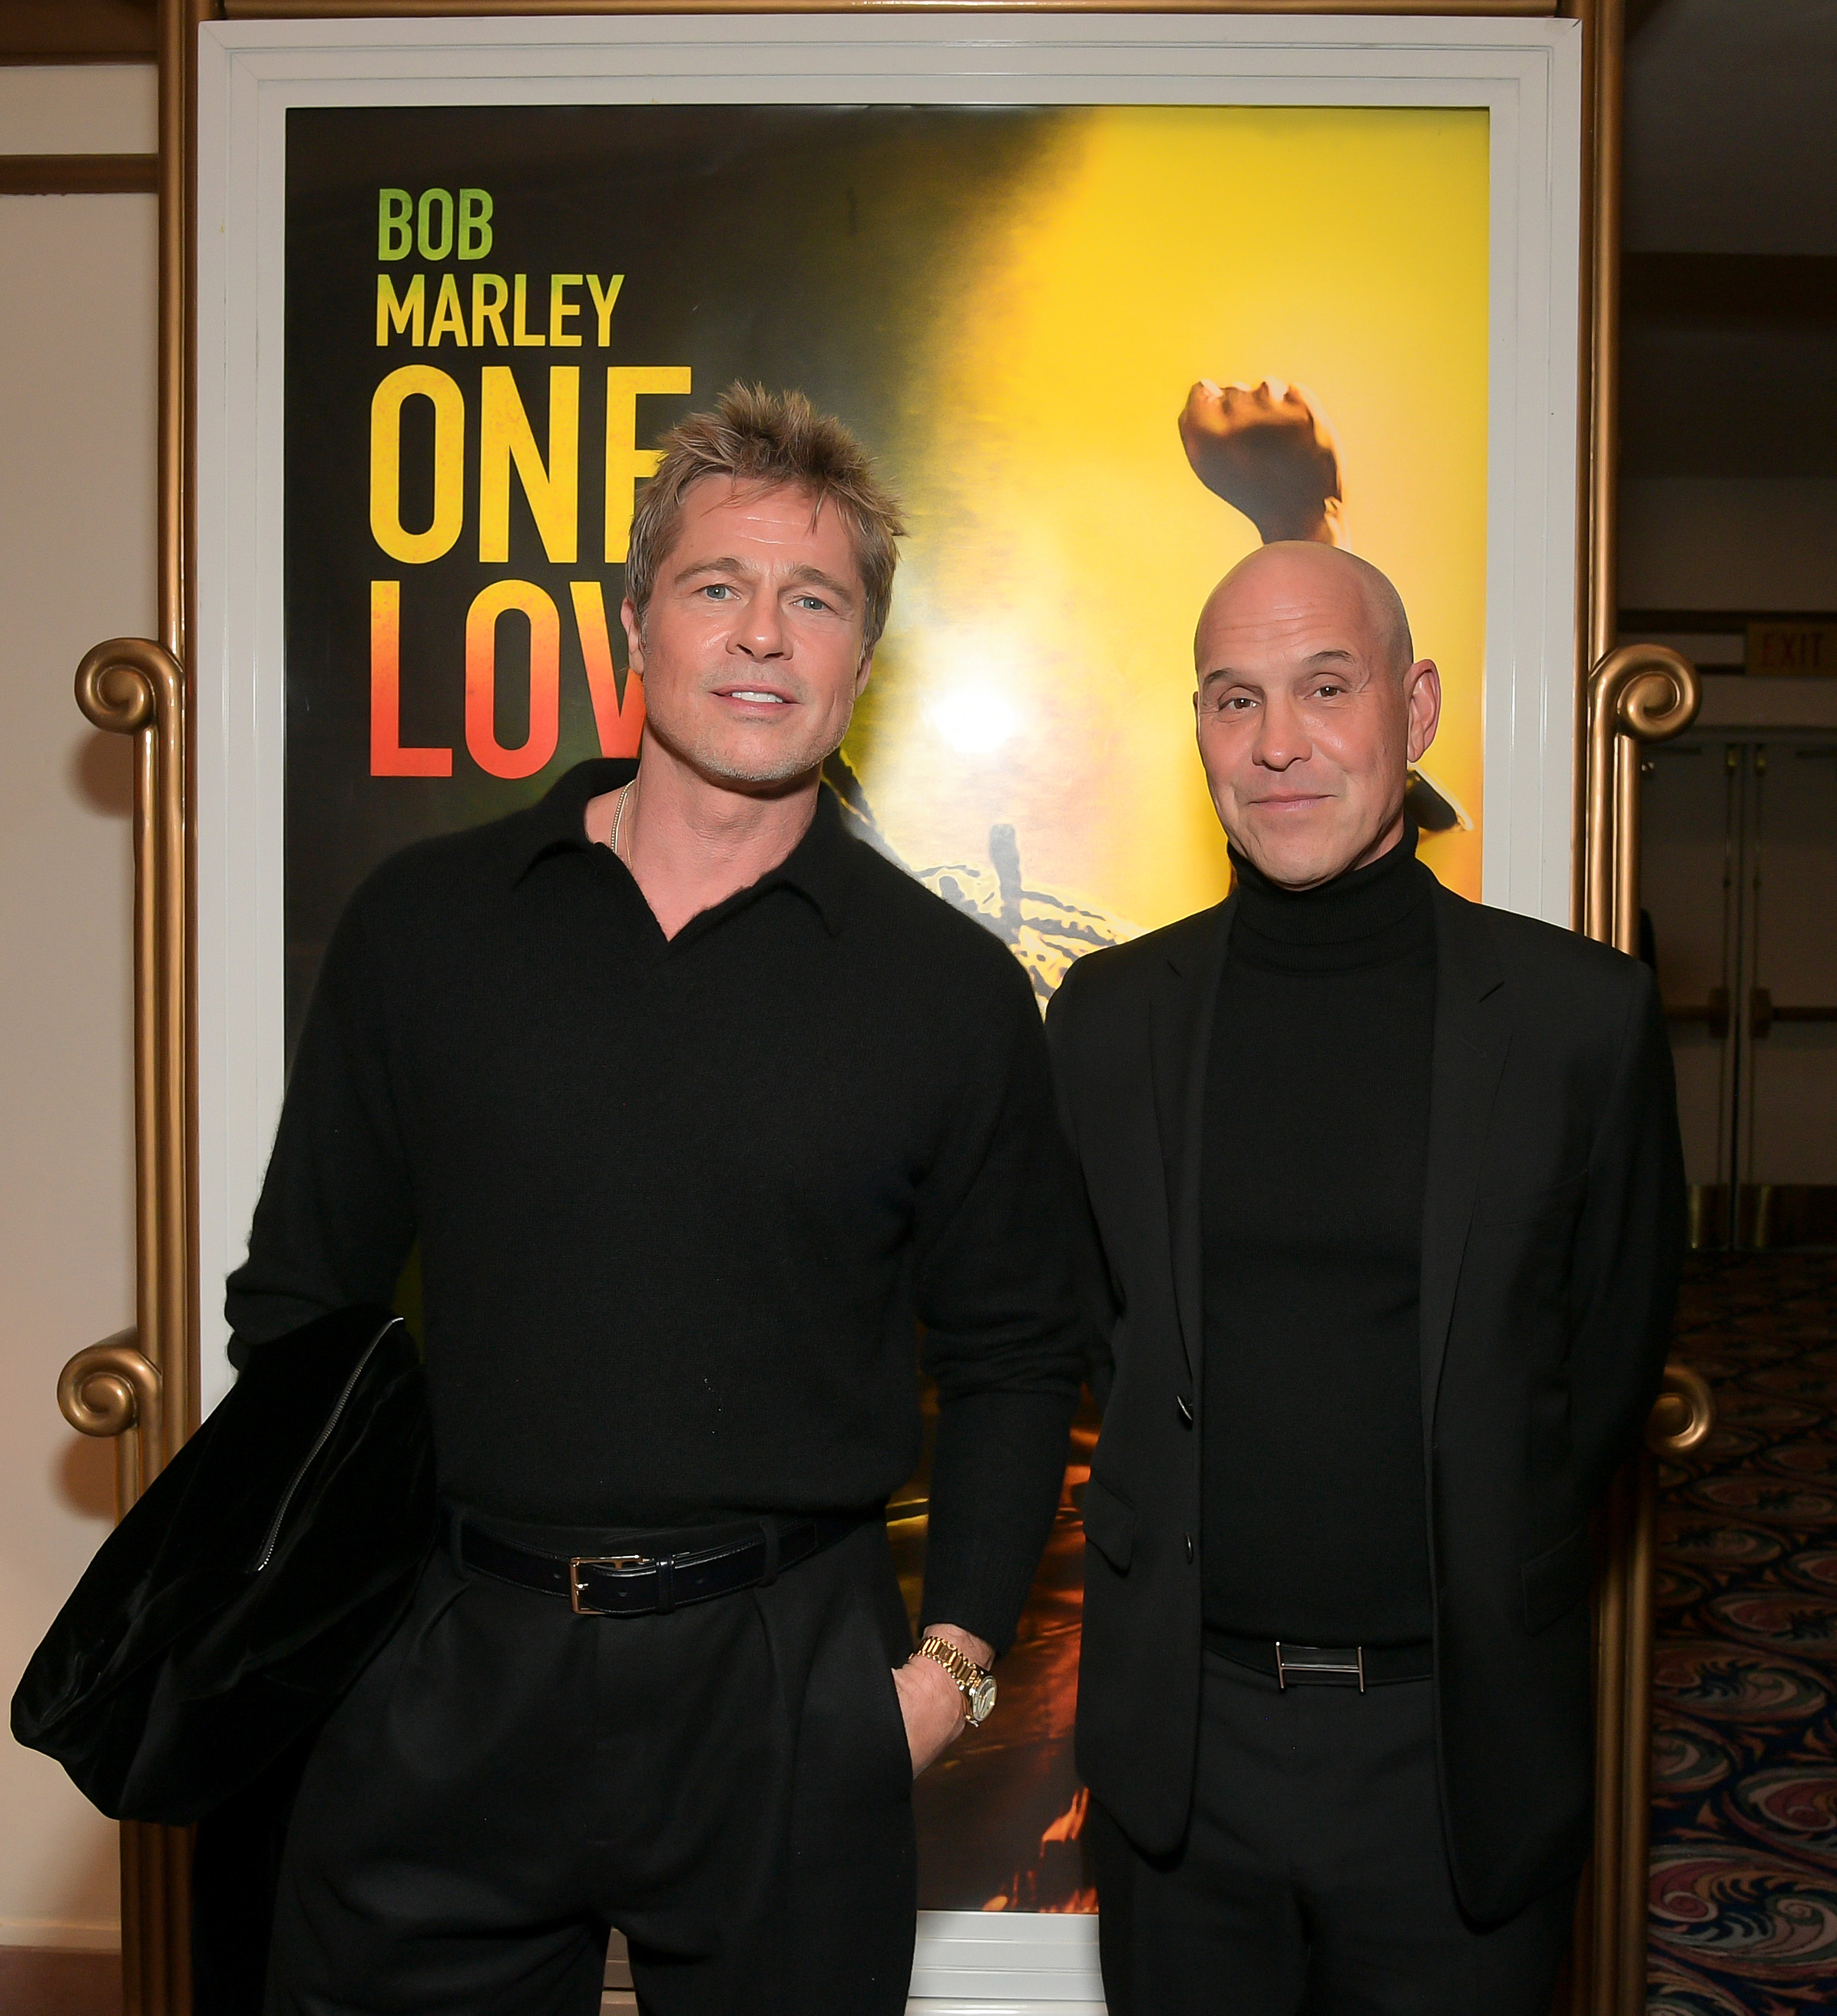 Brad Pitt and Brian Robbins during the Los Angeles Premiere of "Bob Marley: One Love" at Regency Village Theatre on February 6, 2024, in Los Angeles, California. | Source: Getty Images